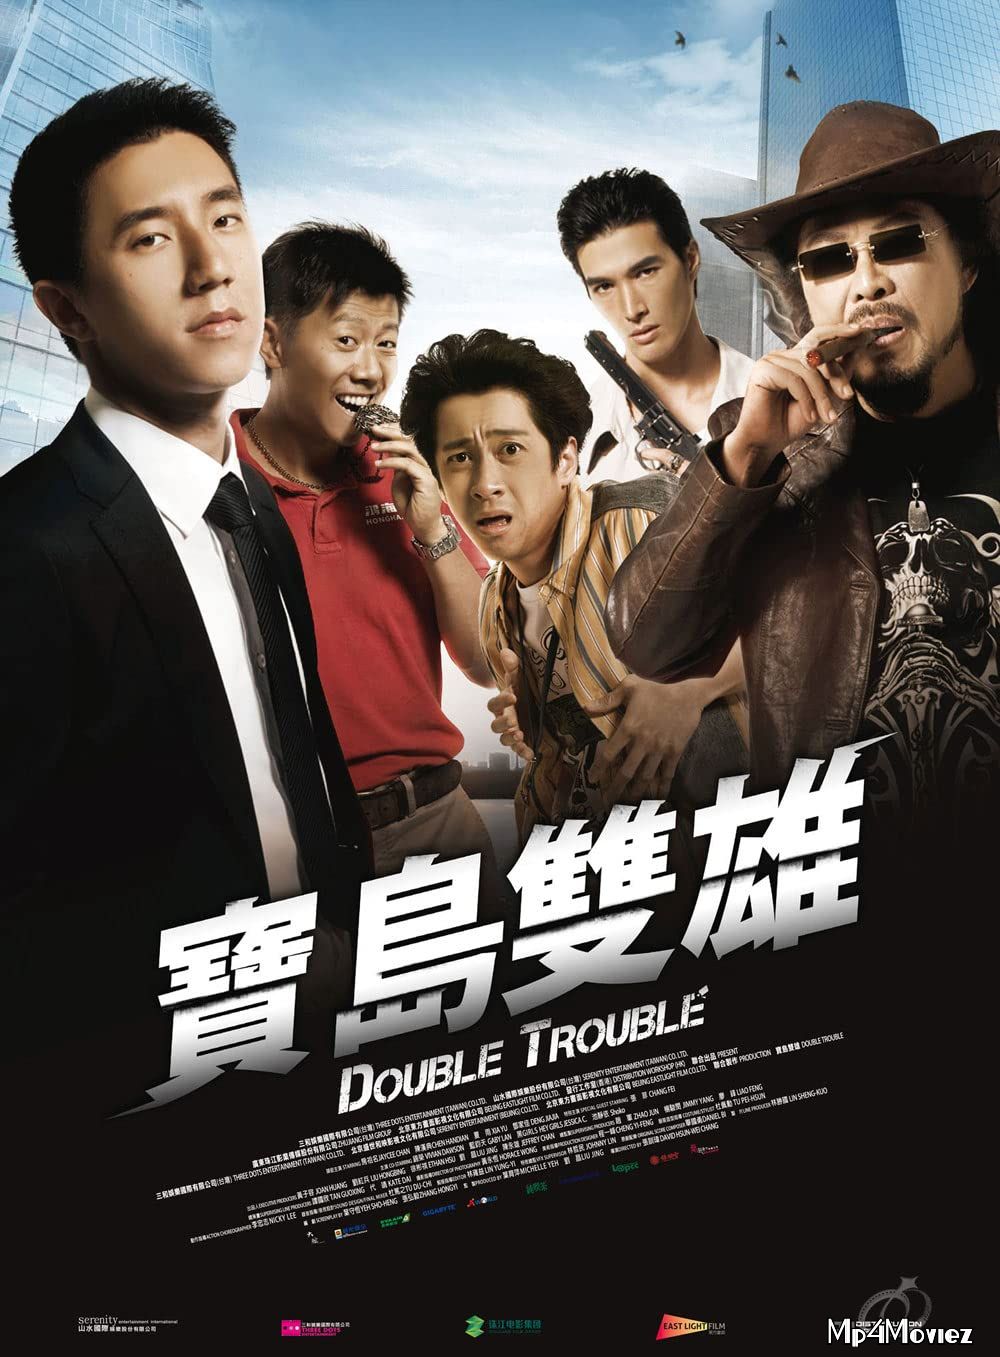 Double Trouble (2012) Hindi Dubbed BRRip download full movie